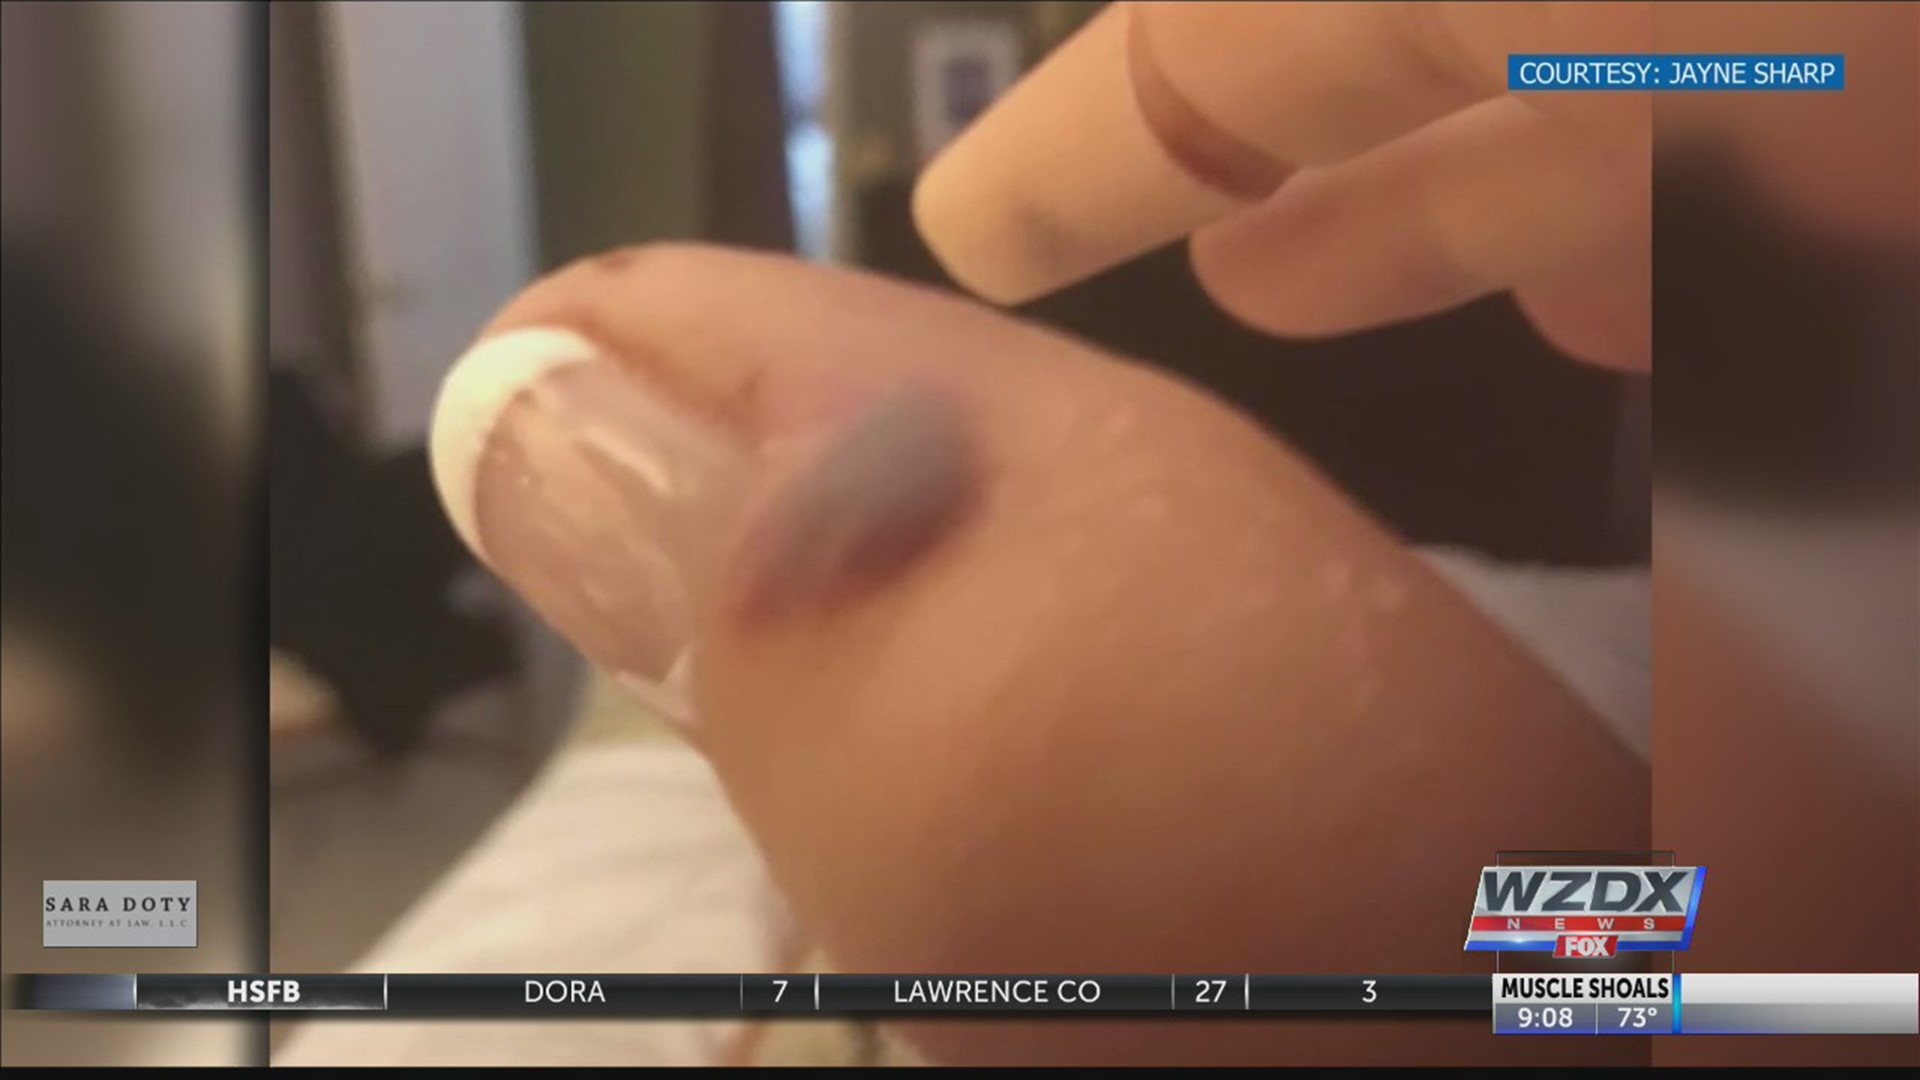 A Knoxville woman is still regaining feeling in her hands after multiple surgeries to stop a flesh-eating bacteria.